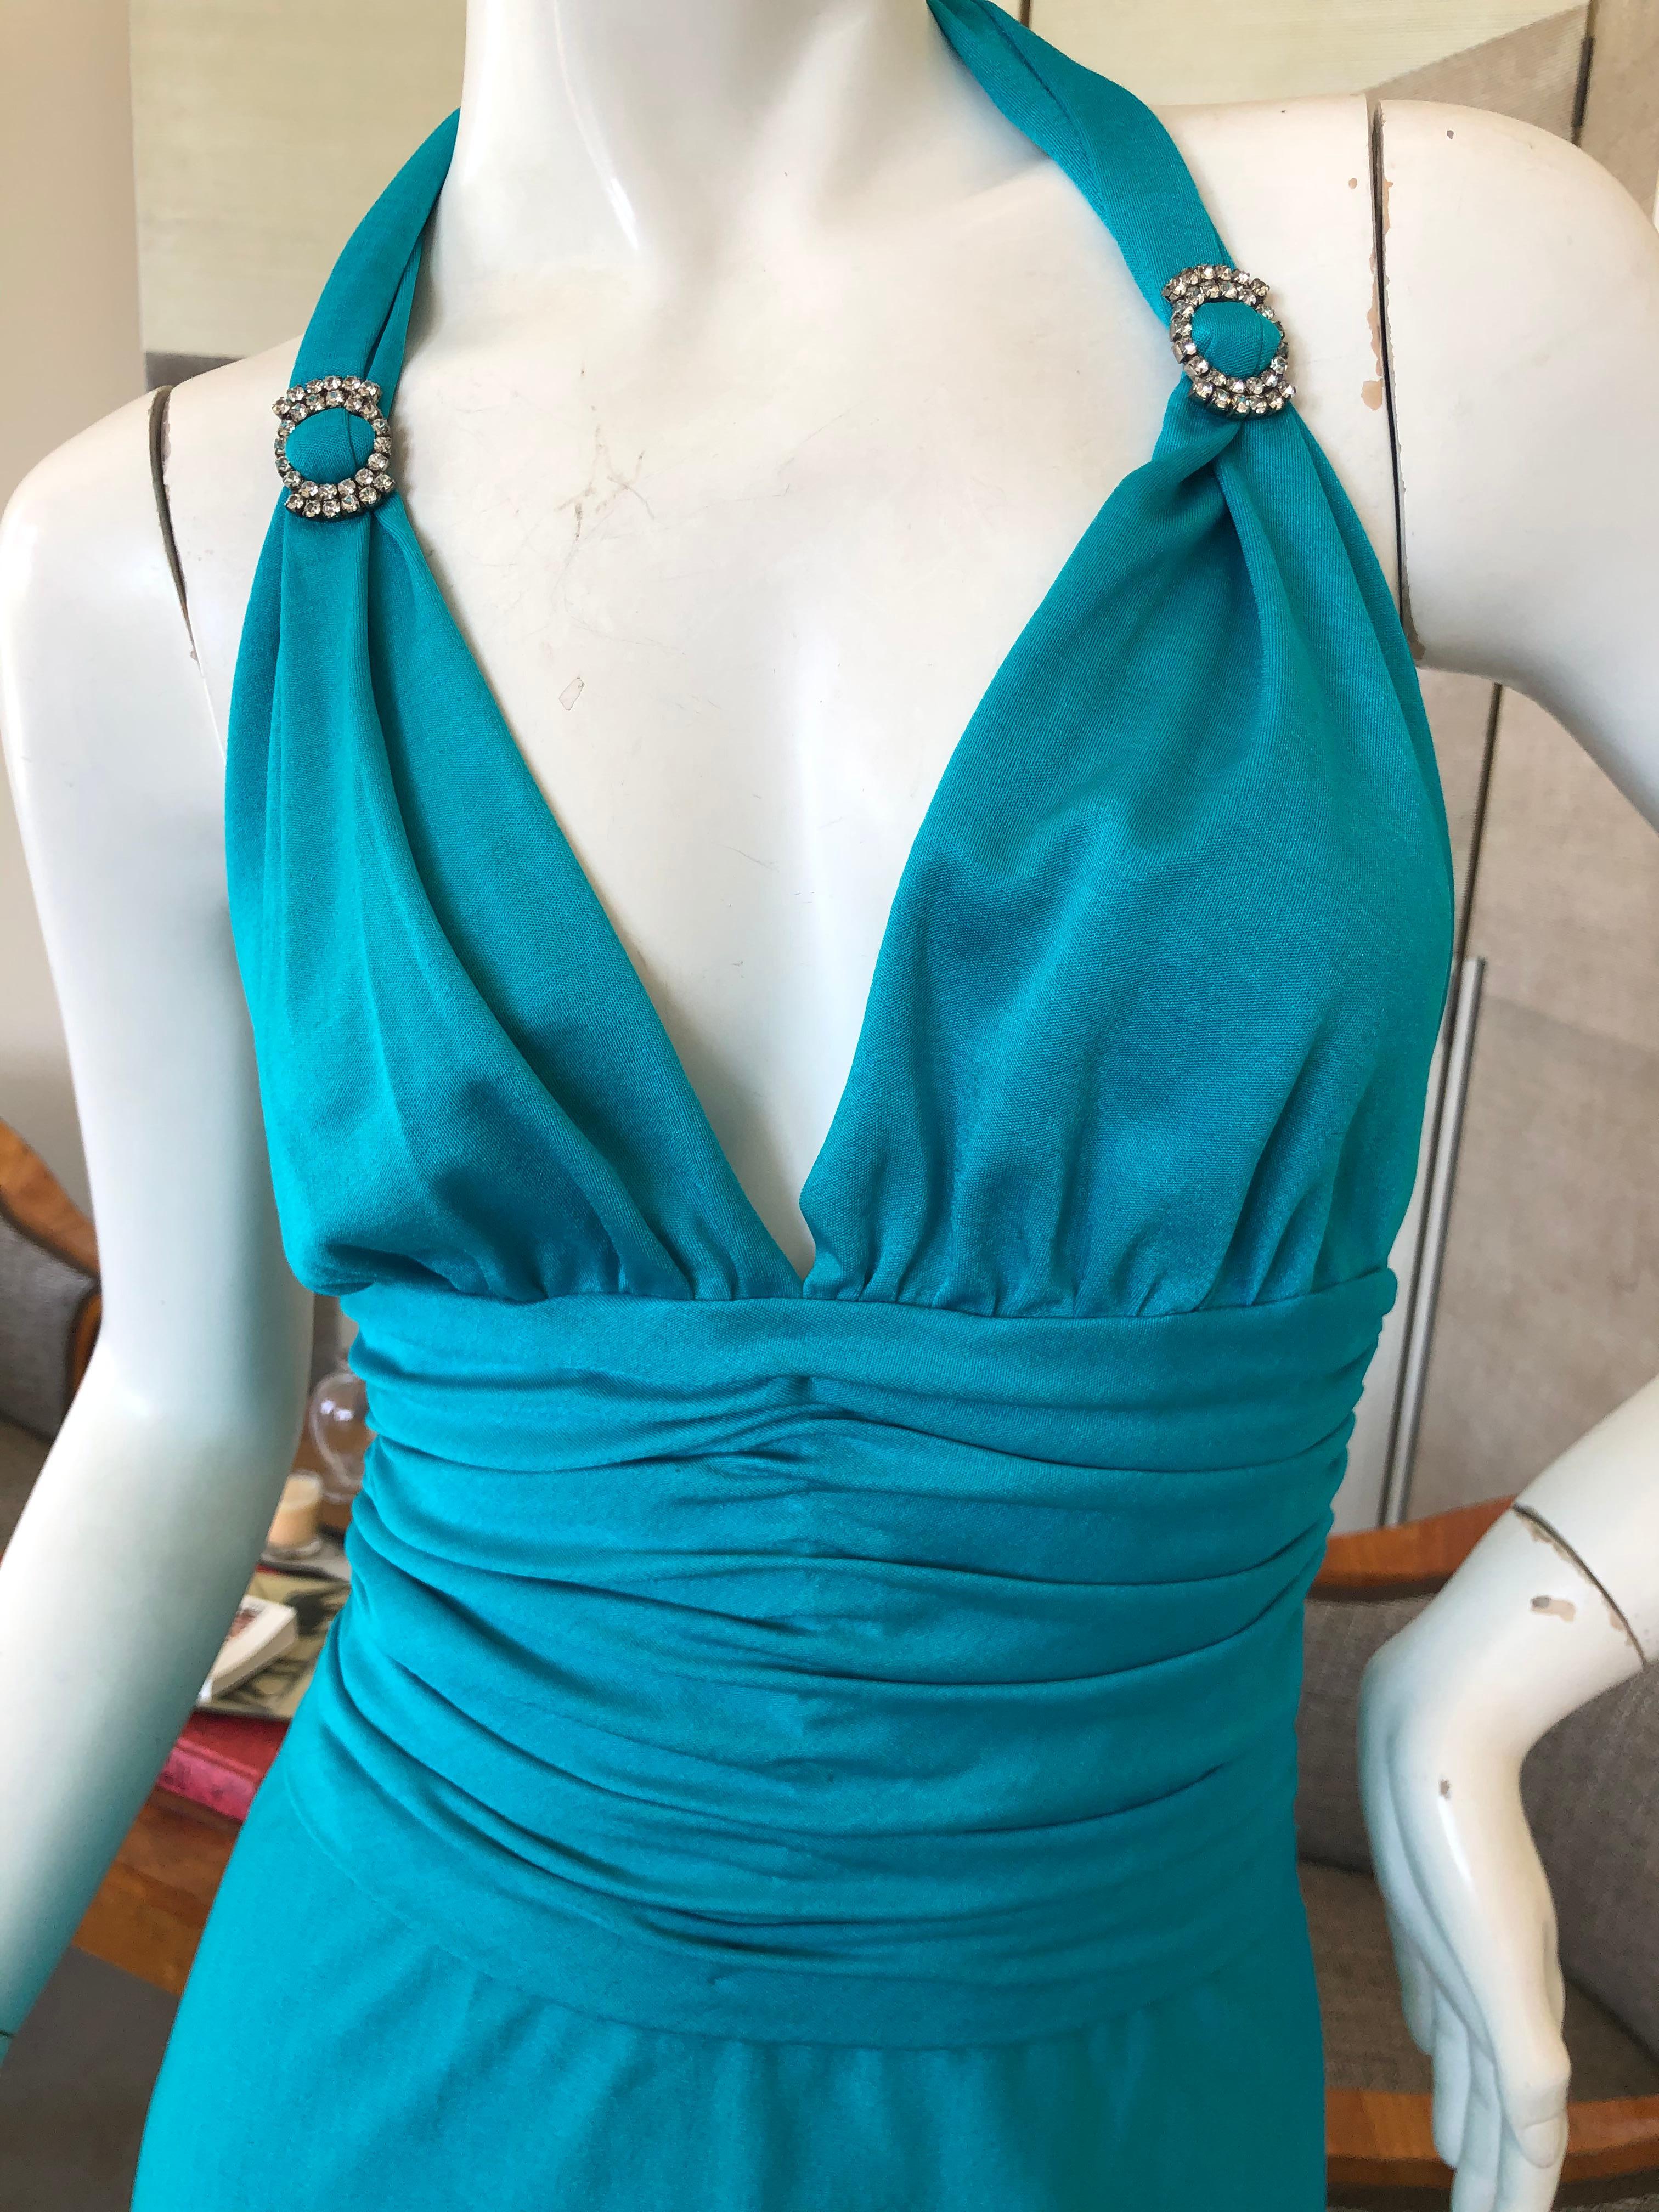 Loris Azzaro Couture 70's Low Cut Blue Cocktail Dress with Crystal Accents For Sale 1